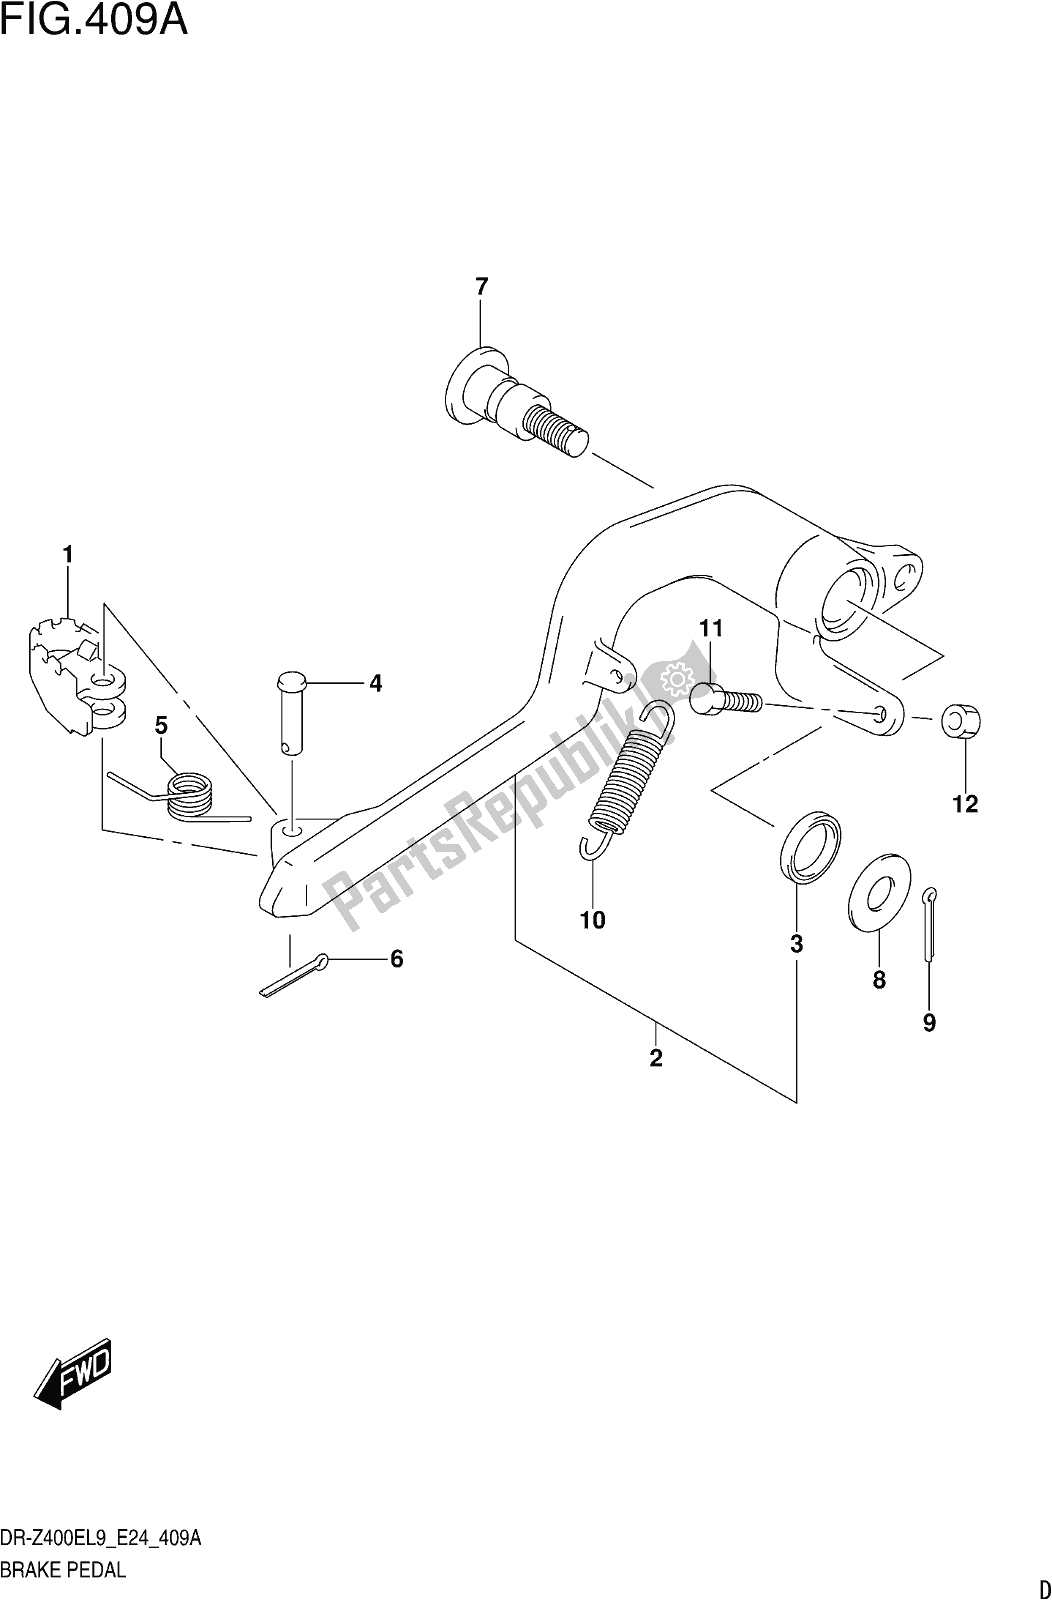 All parts for the Fig. 409a Brake Pedal of the Suzuki DR-Z 400E 2019